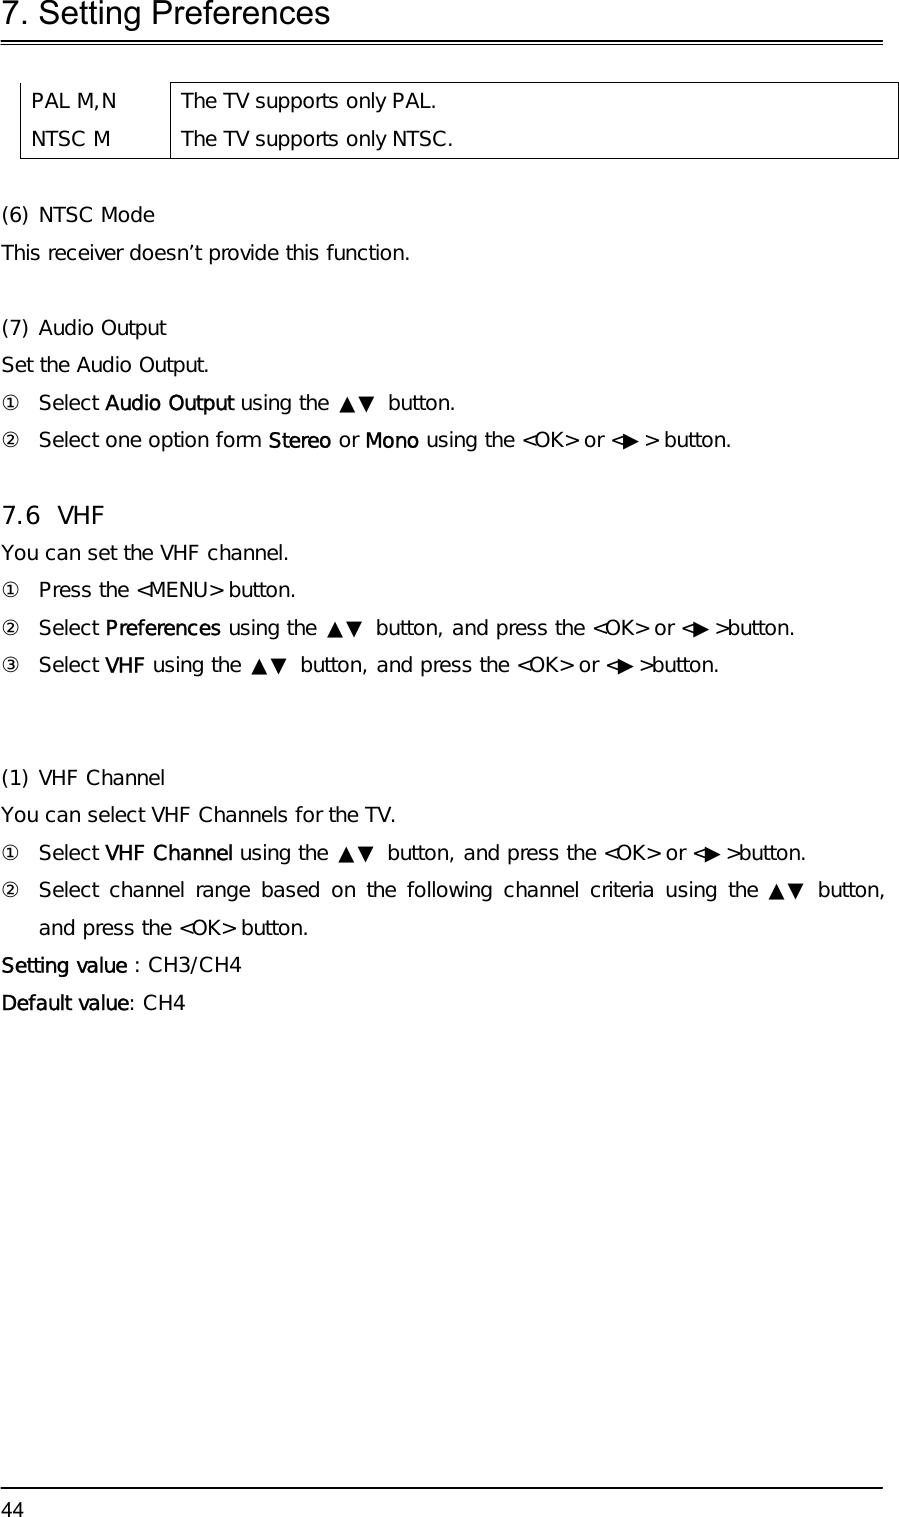 7. Setting Preferences  44PAL M,N  The TV supports only PAL. NTSC M  The TV supports only NTSC.  (6) NTSC Mode  This receiver doesn’t provide this function.  (7) Audio Output  Set the Audio Output.  ① Select Audio Output using the ▲▼ button. ②  Select one option form Stereo or Mono using the &lt;OK&gt; or &lt;▶&gt; button.  7.6 VHF  You can set the VHF channel. ①  Press the &lt;MENU&gt; button. ② Select Preferences using the ▲▼ button, and press the &lt;OK&gt; or &lt;▶&gt;button. ③ Select VHF using the ▲▼ button, and press the &lt;OK&gt; or &lt;▶&gt;button.  (1) VHF Channel You can select VHF Channels for the TV.  ① Select VHF Channel using the ▲▼ button, and press the &lt;OK&gt; or &lt;▶&gt;button. ②  Select channel range based on the following channel criteria using the ▲▼ button, and press the &lt;OK&gt; button.  Setting value : CH3/CH4 Default value: CH4      